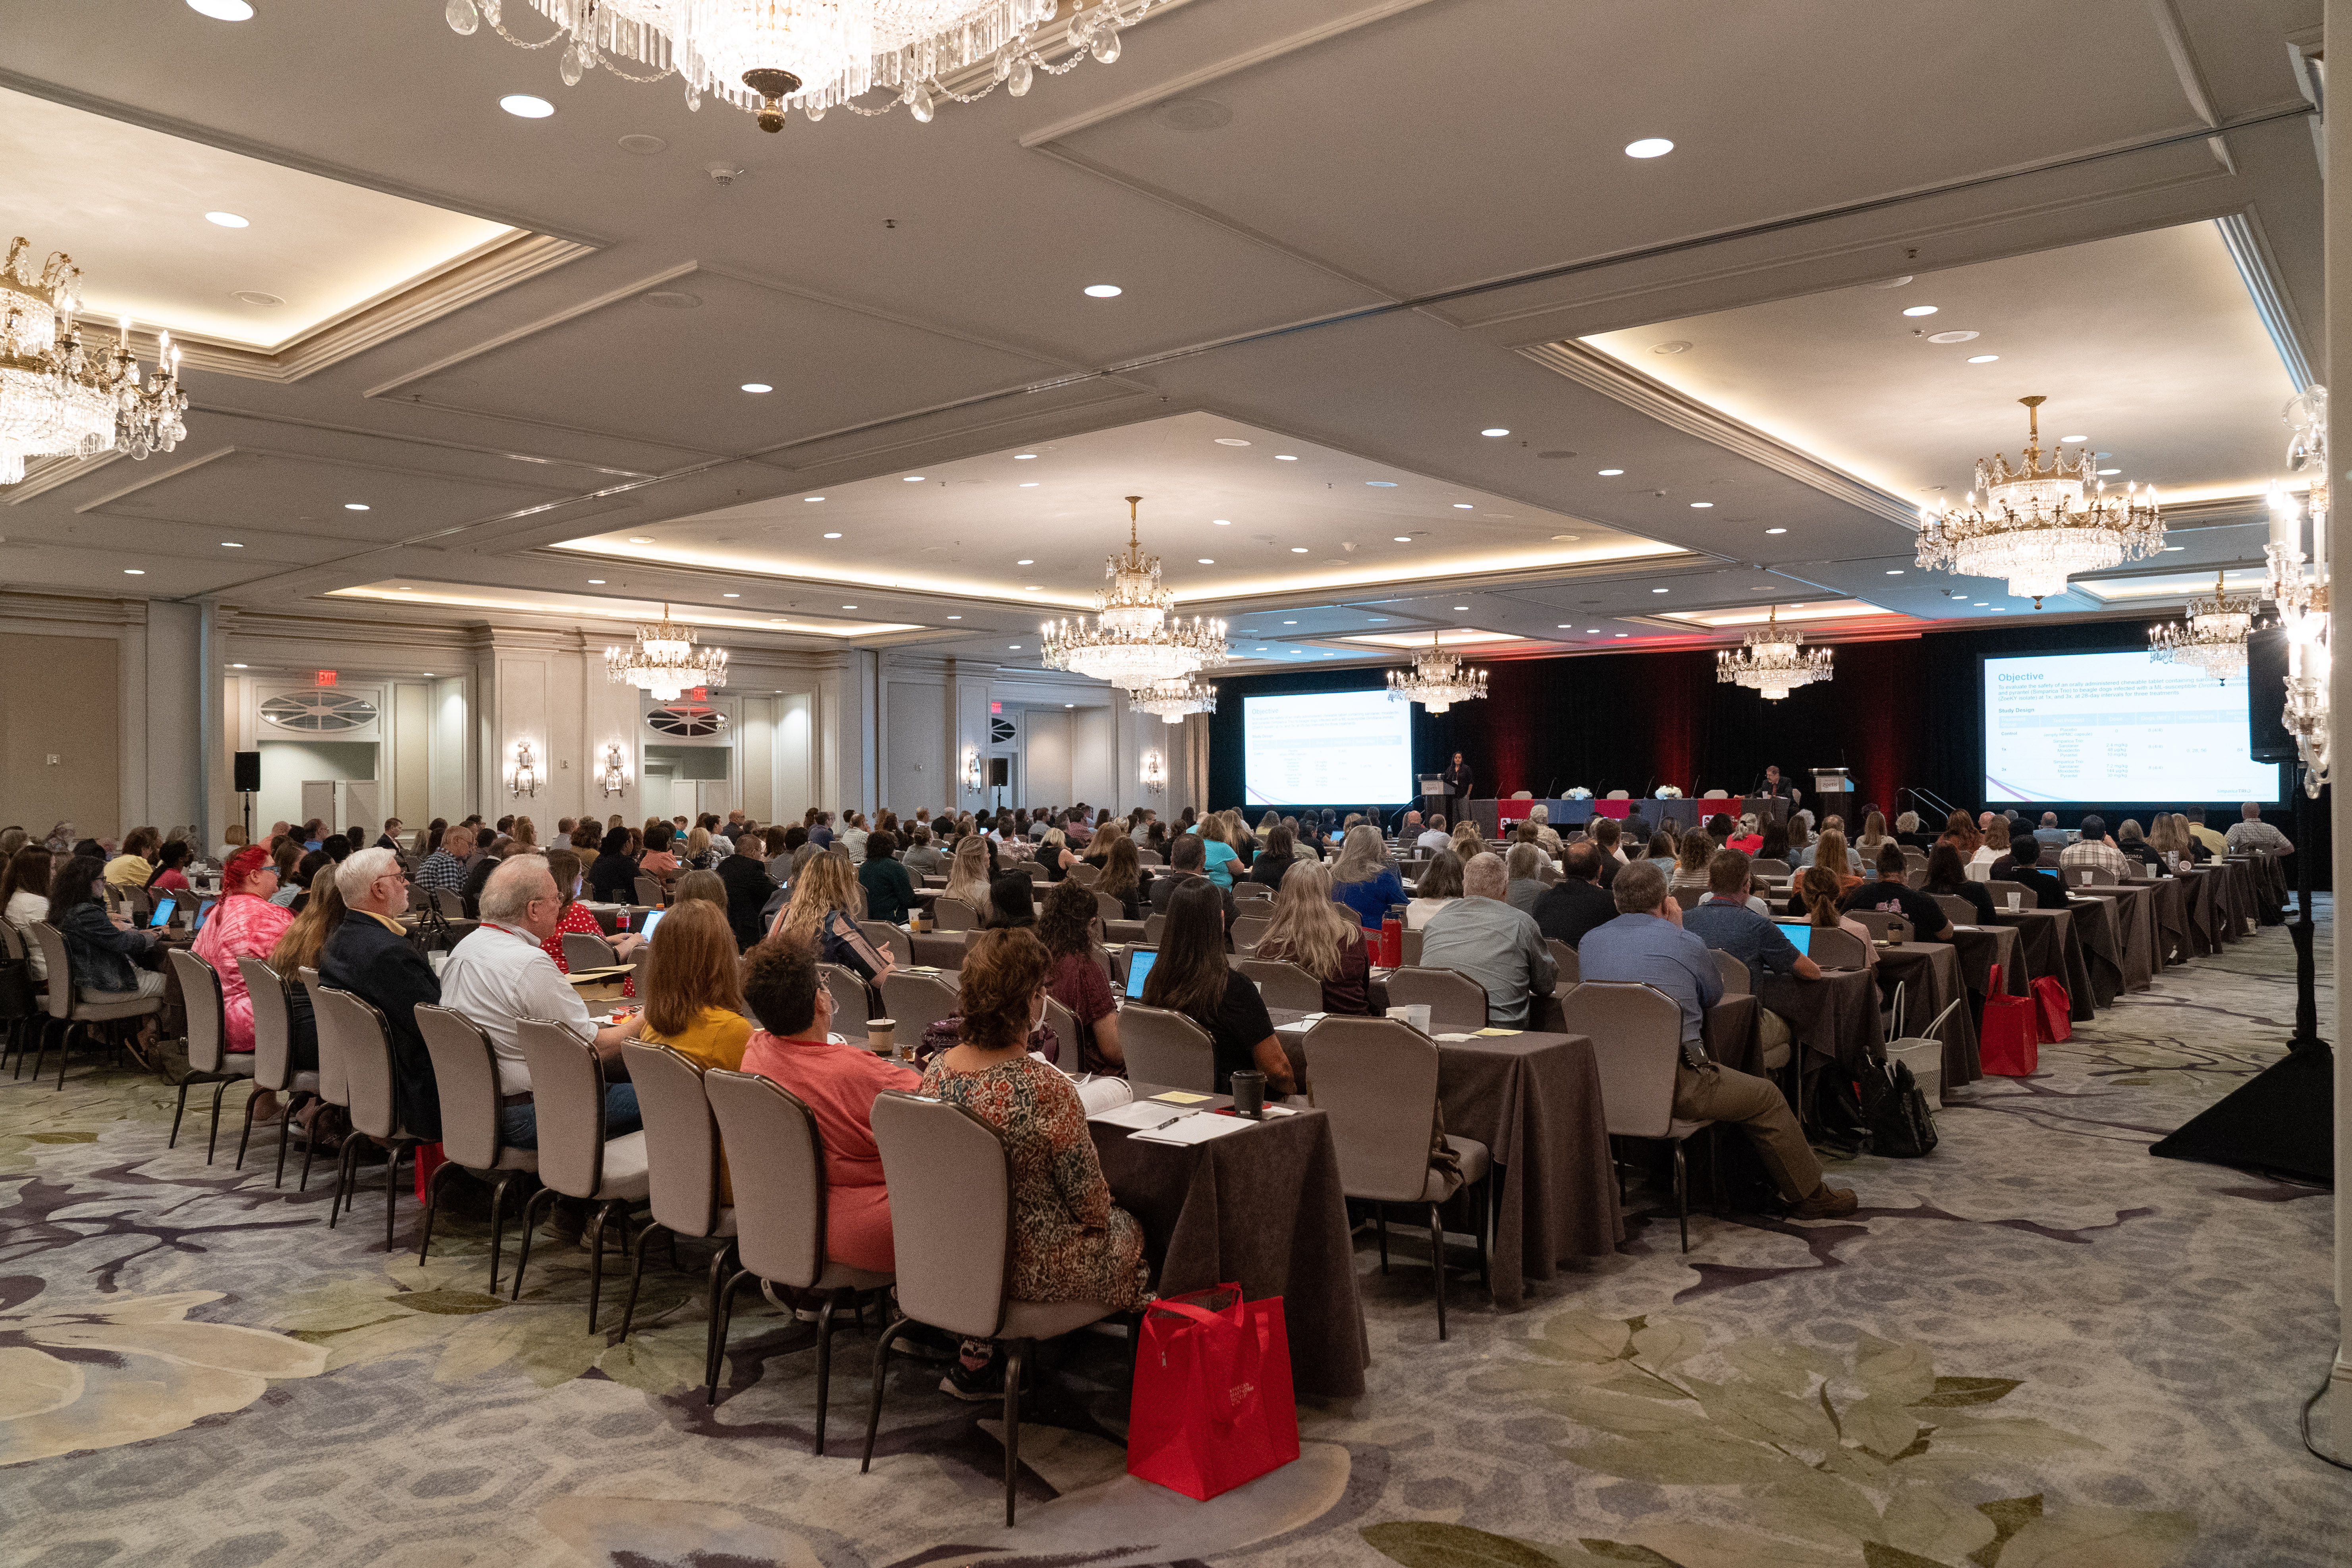 New Approaches and Protocols for Heartworm Disease Presented  at 17th Triennial Heartworm Symposium